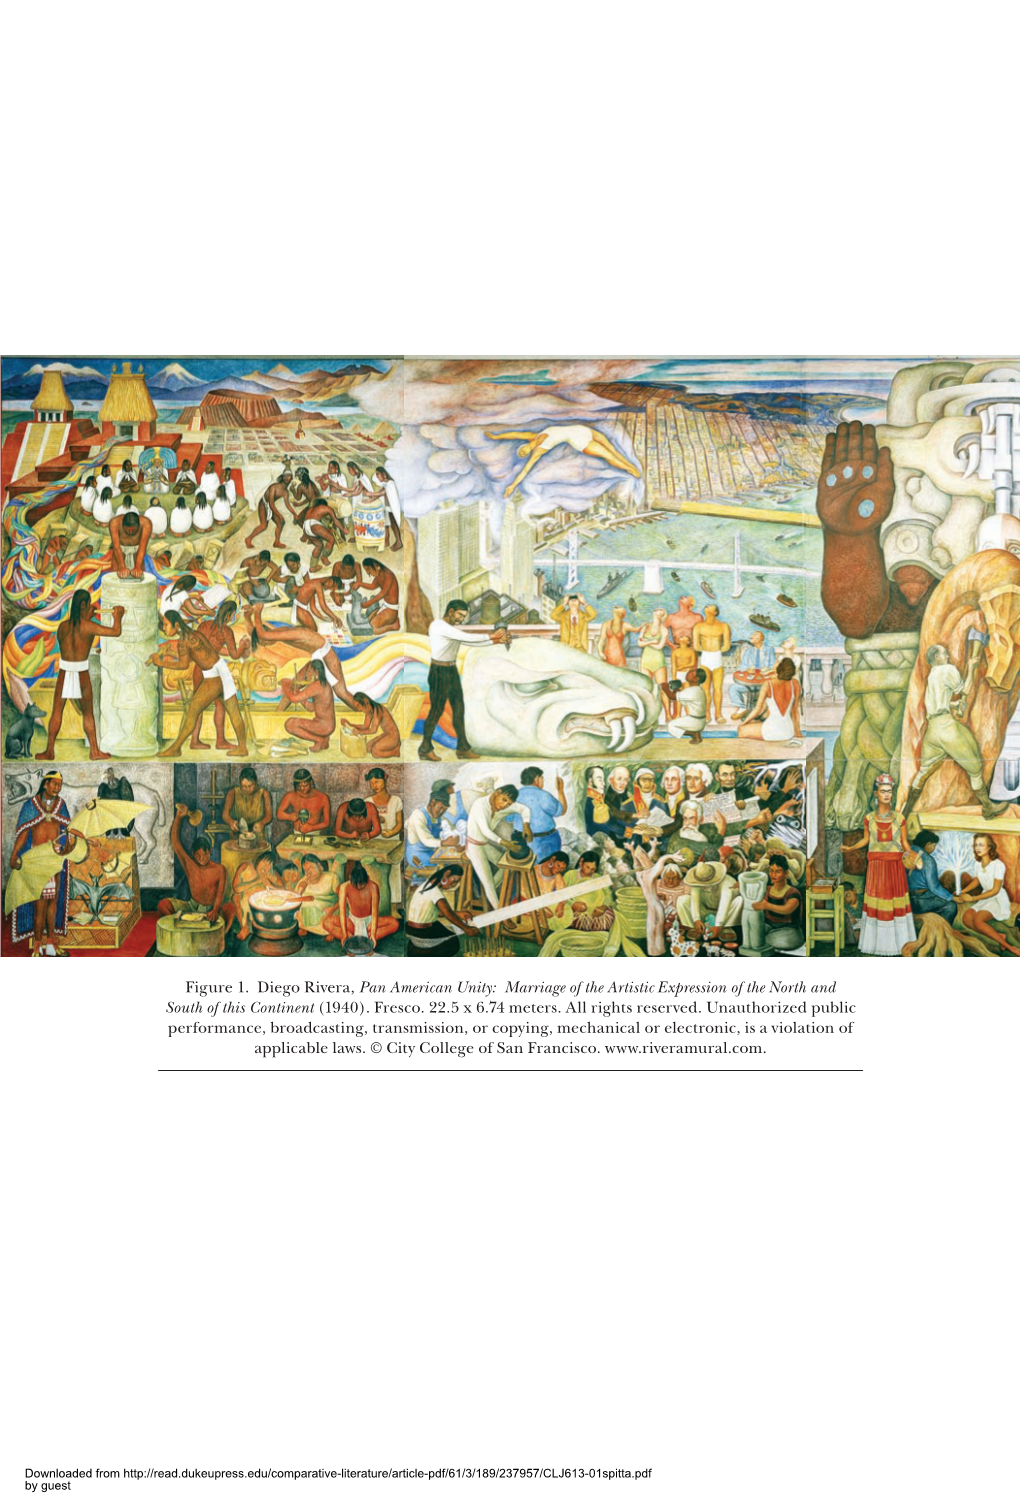 Figure 1. Diego Rivera, Pan American Unity: Marriage of the Artistic Expression of the North and South of This Continent (1940)